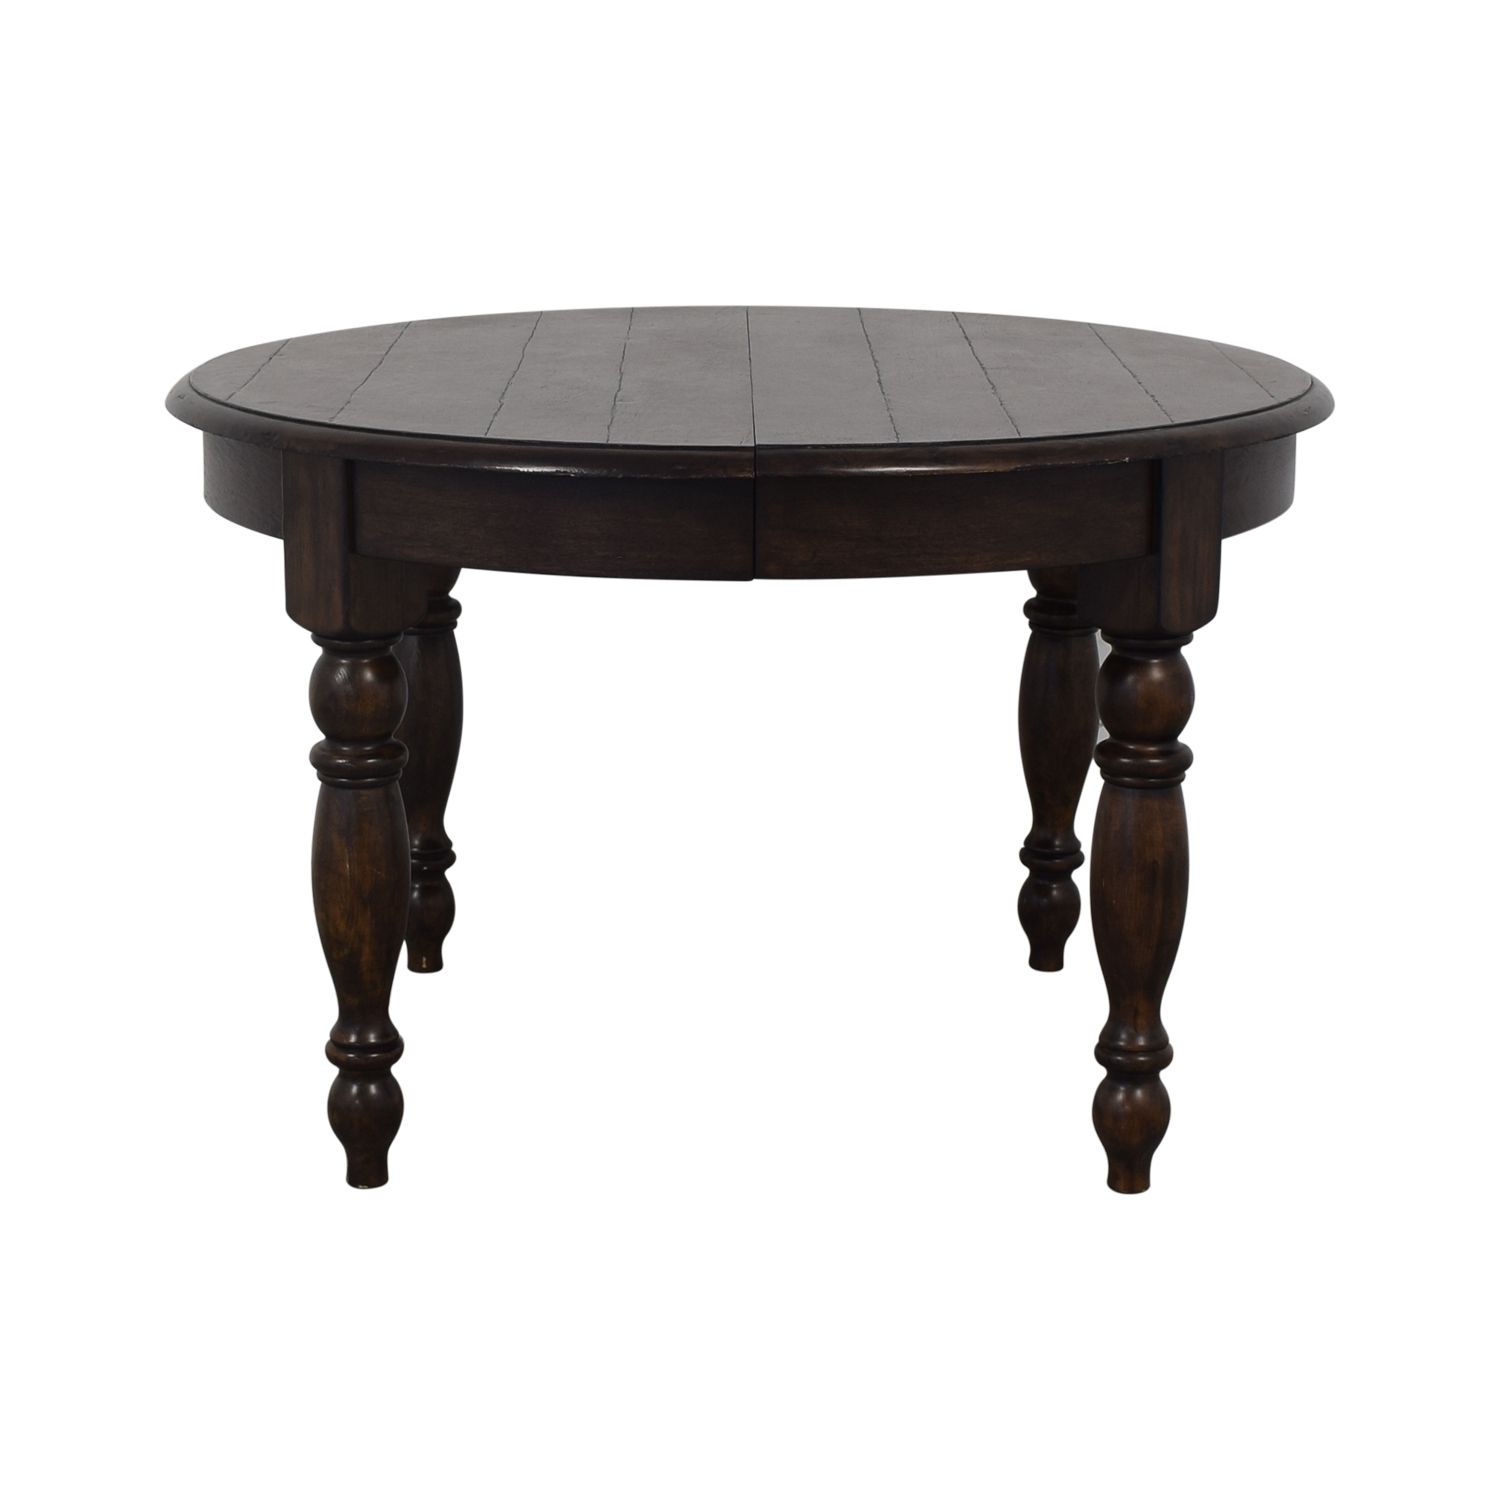 81% Off – Pottery Barn Pottery Barn Evelyn Extending Round Dining Table /  Tables Pertaining To Current Salvaged Black Shayne Drop Leaf Kitchen Tables (Photo 10 of 25)